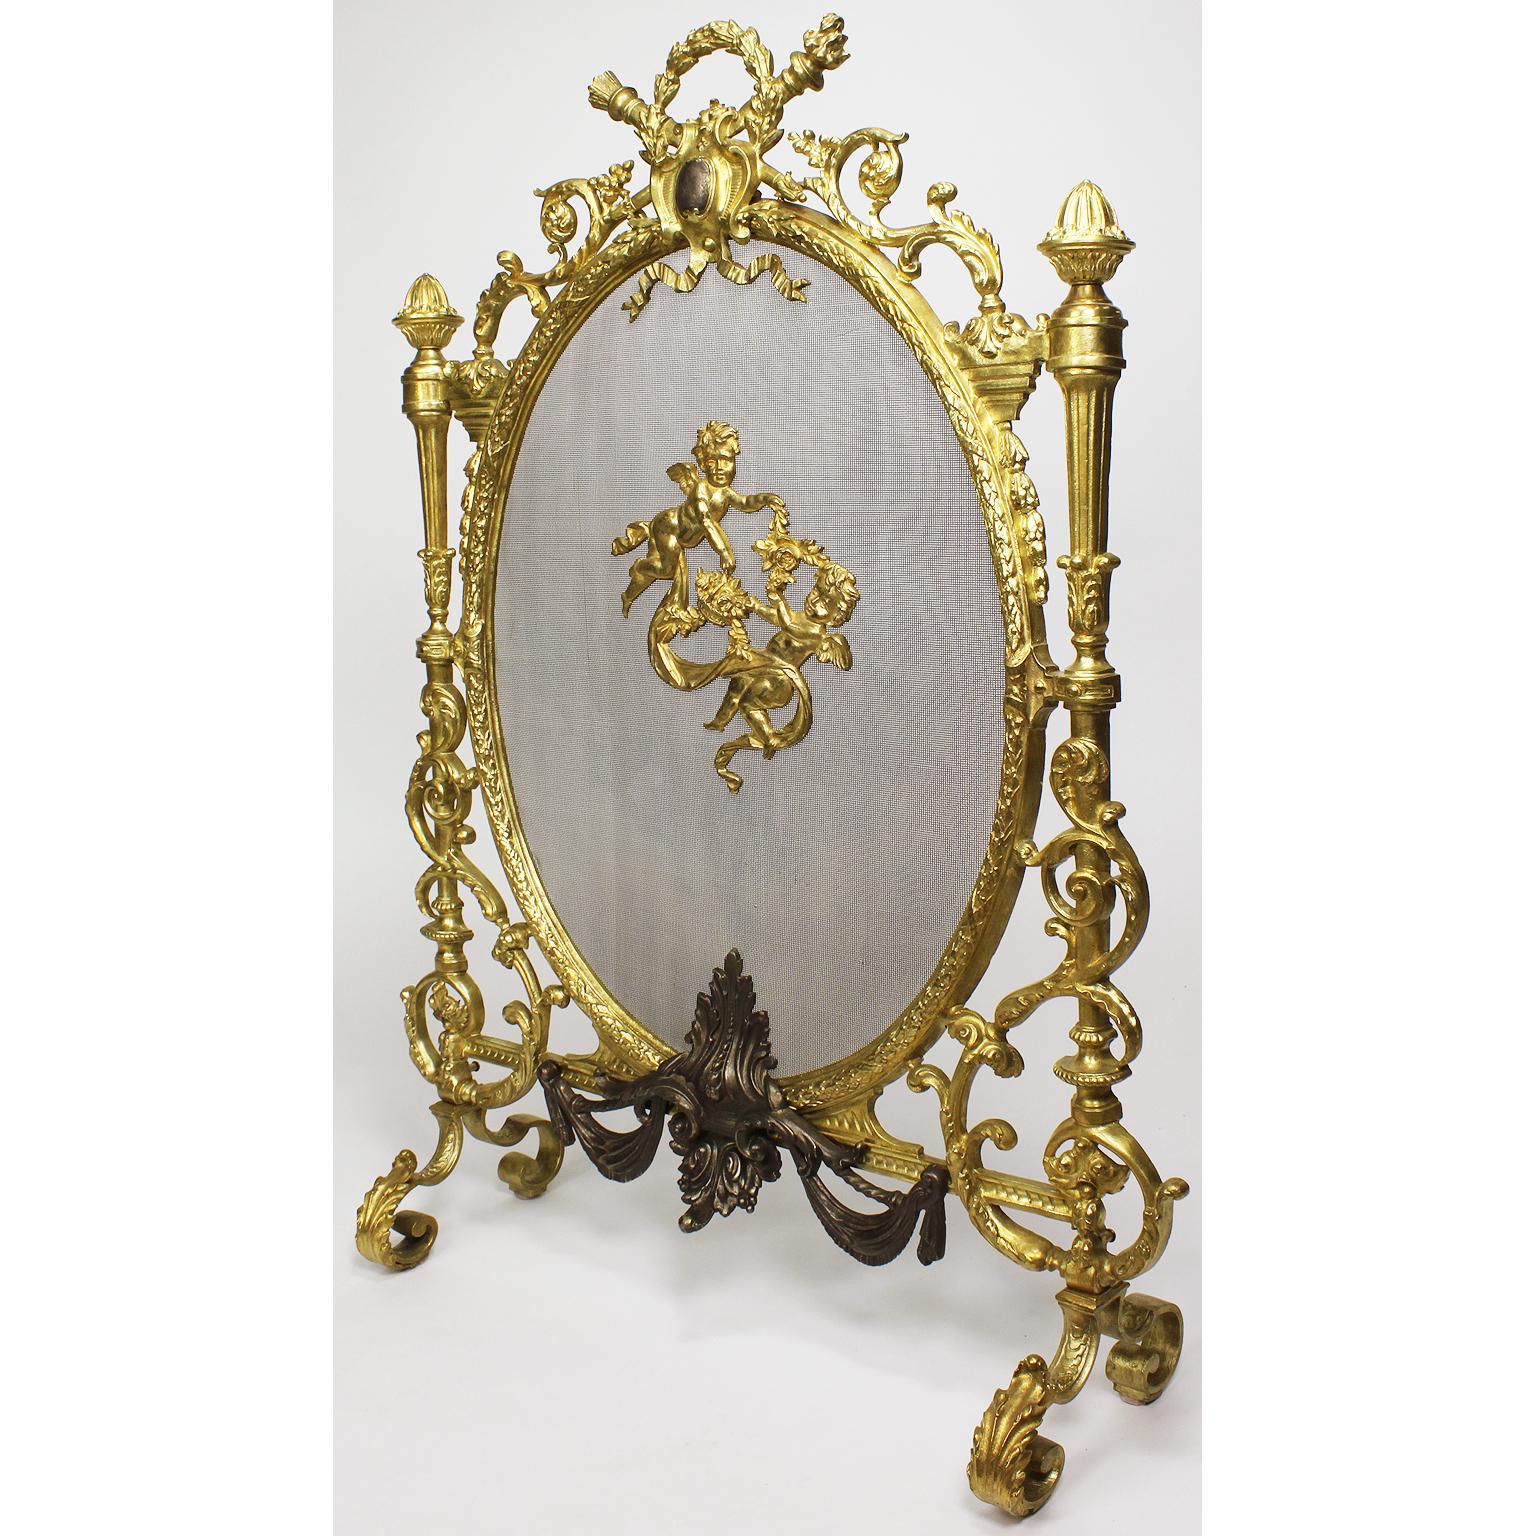 Early 20th Century French 19th-20th Century Louis XV Style Gilt-Bronze Fireplace Screen For Sale